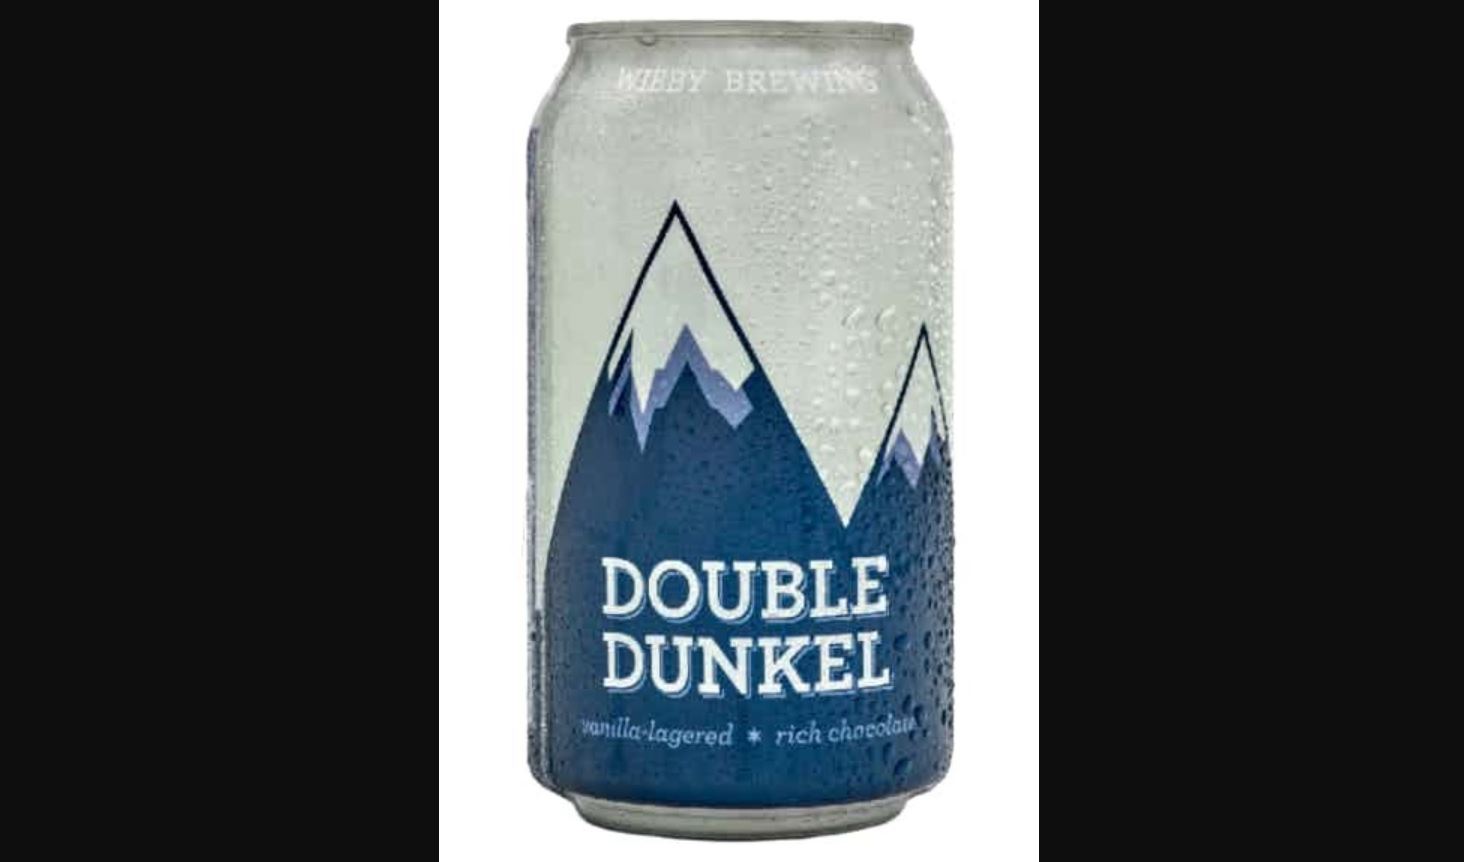 Wibby Double Dunkel